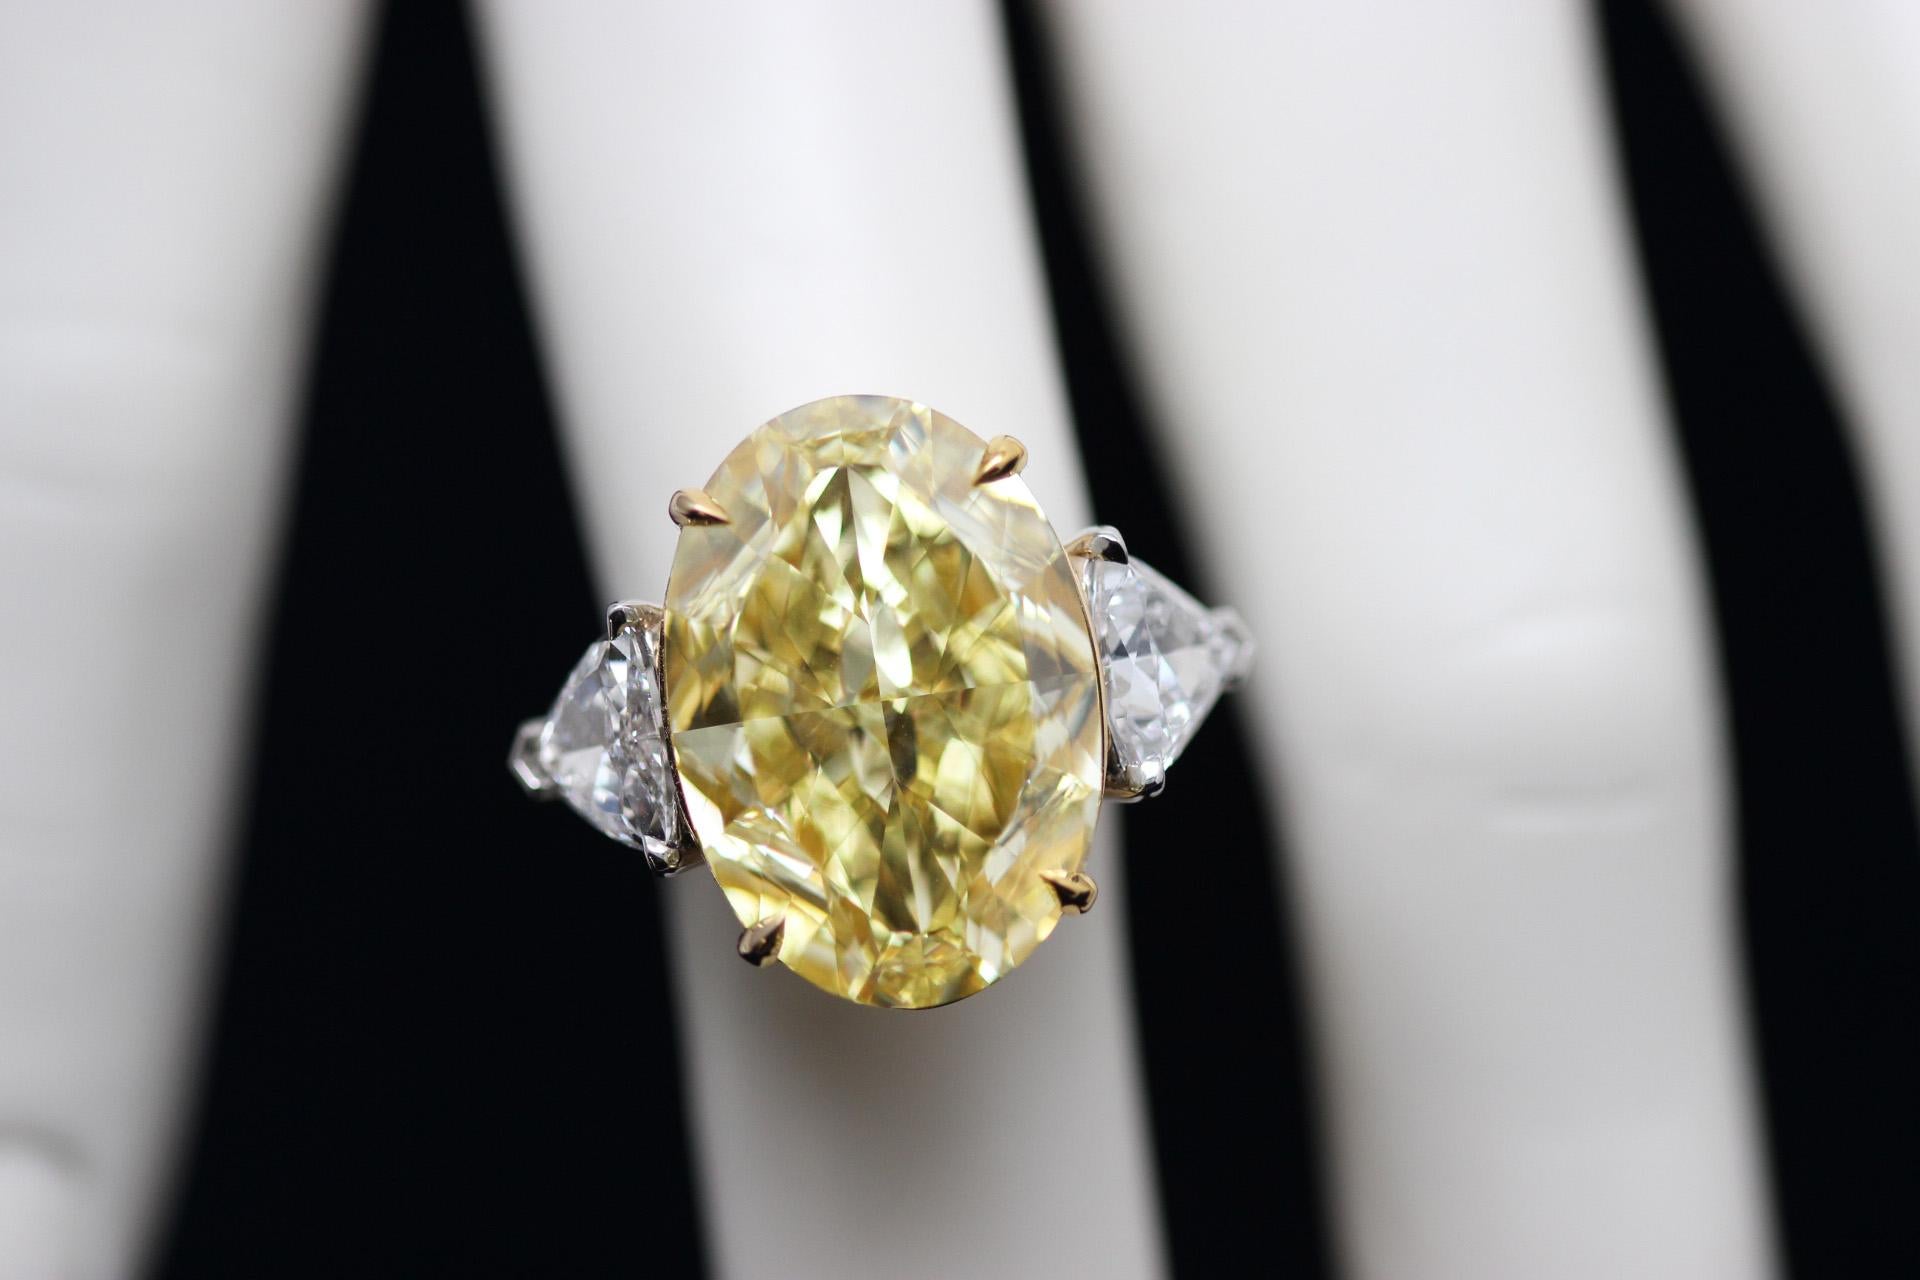 A modern classic from Scarselli  - a GIA-certified 20.02 carat Fancy intense yellow oval-cut diamond set in an 18k yellow gold basket with a platinum band. Two trapezoid-cut white diamonds (2.01 carats total) embellish the center stone, adding a bit